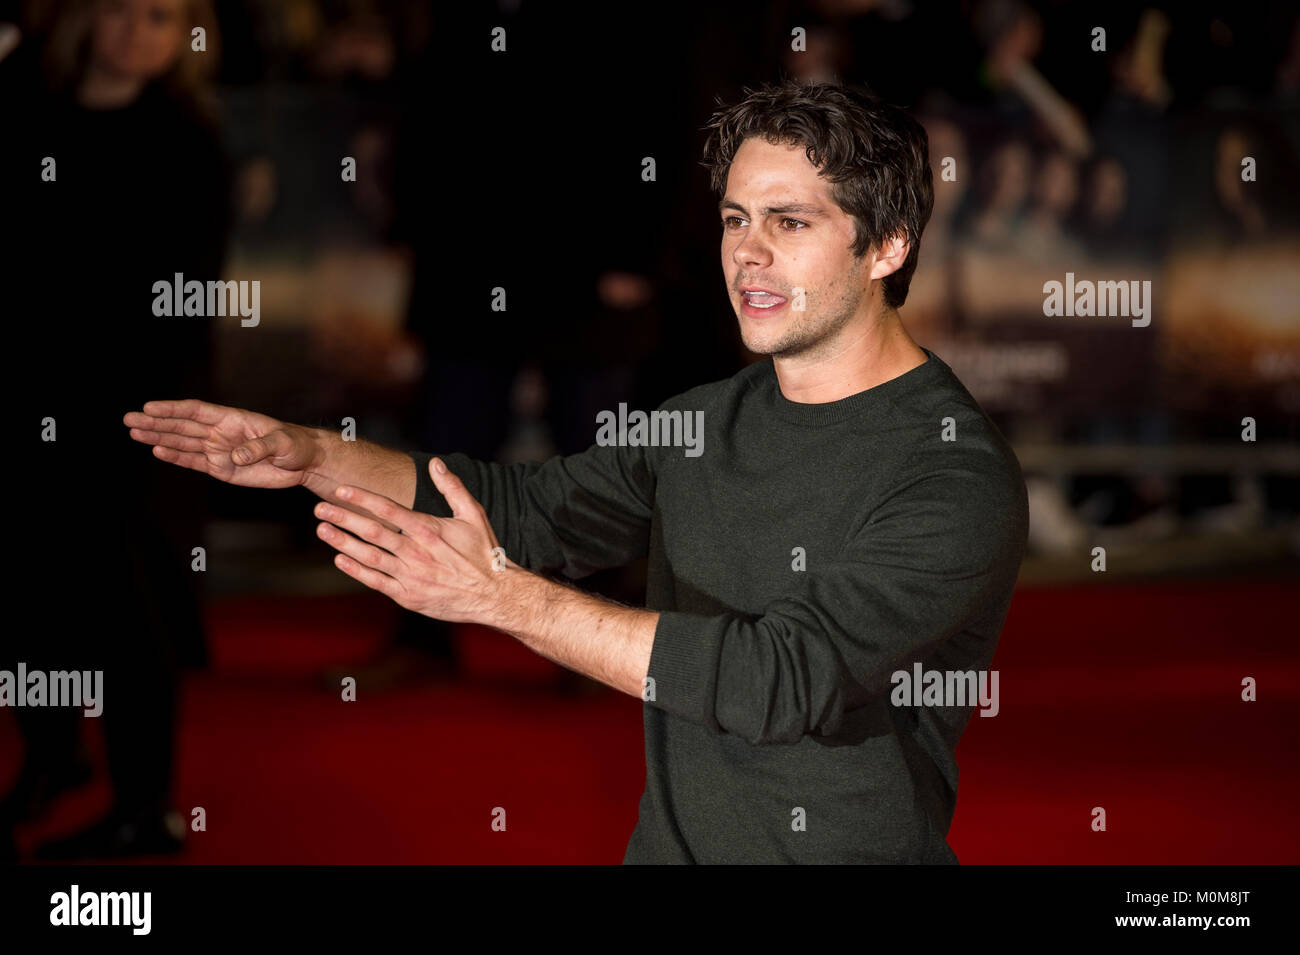 London, UK. 22nd Jan, 2018. Dylan O'Brien attends the 'Maze Runner: The Death Cure' film premiere, London, UK - 22 Jan 2018 Credit: Gary Mitchell/Alamy Live News Stock Photo